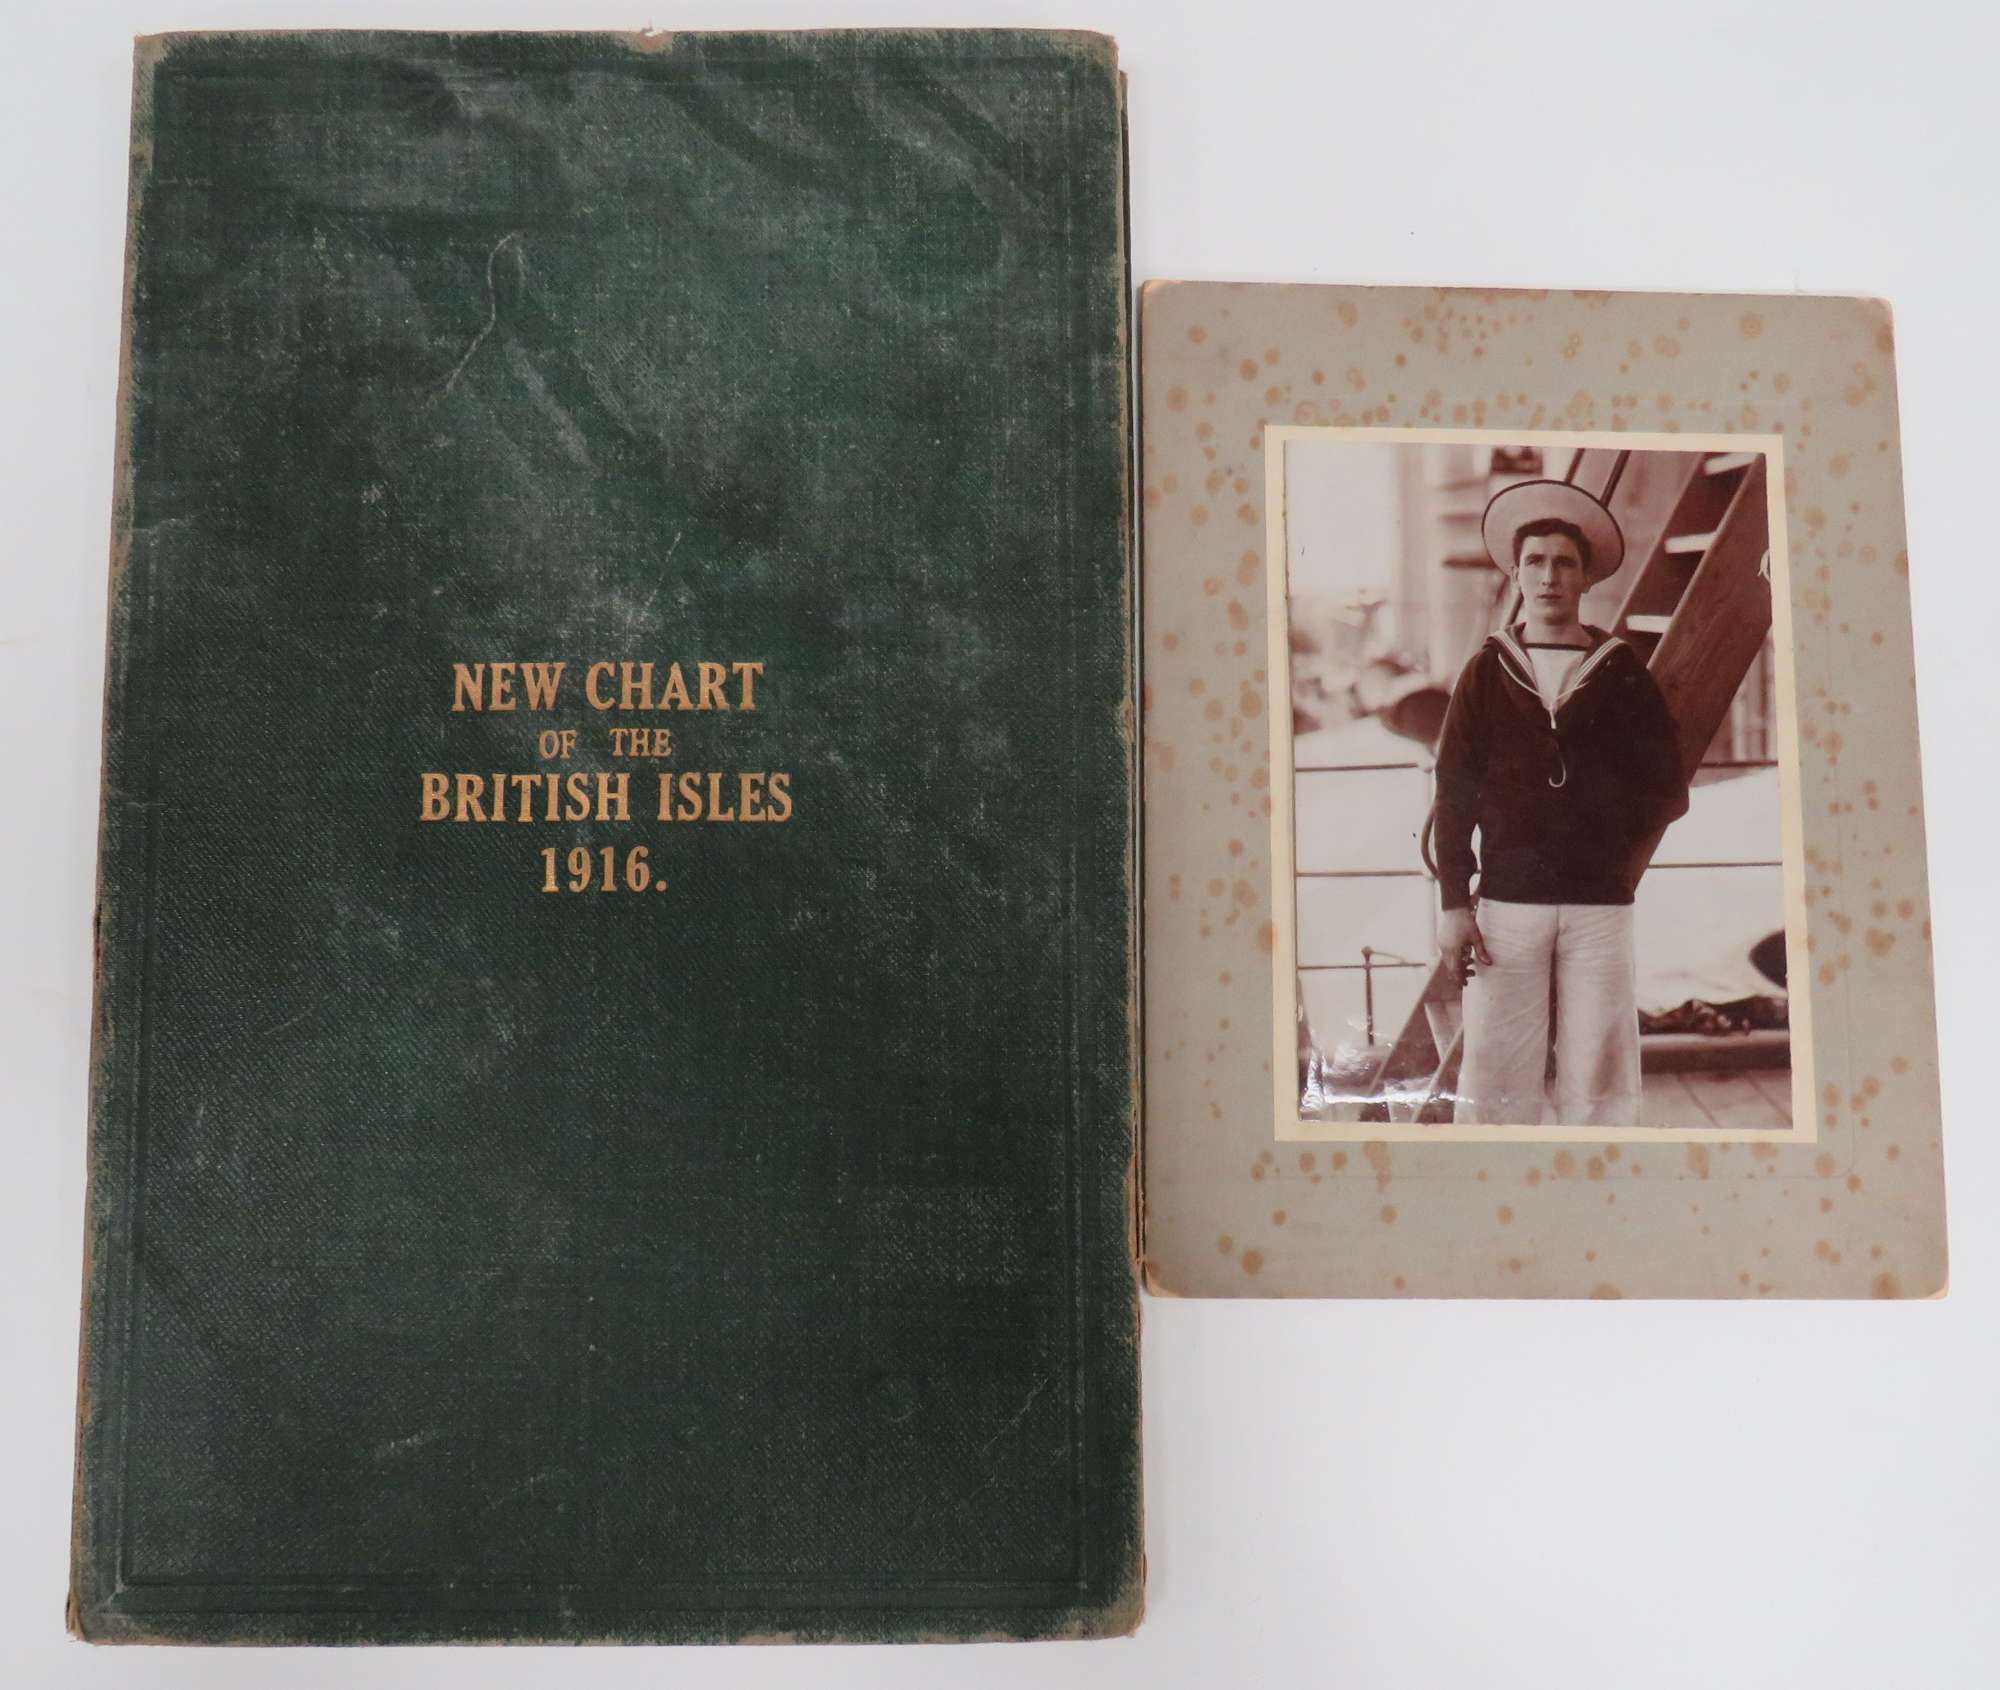 1916 Chart of the British Isles Folder and Naval Photograph